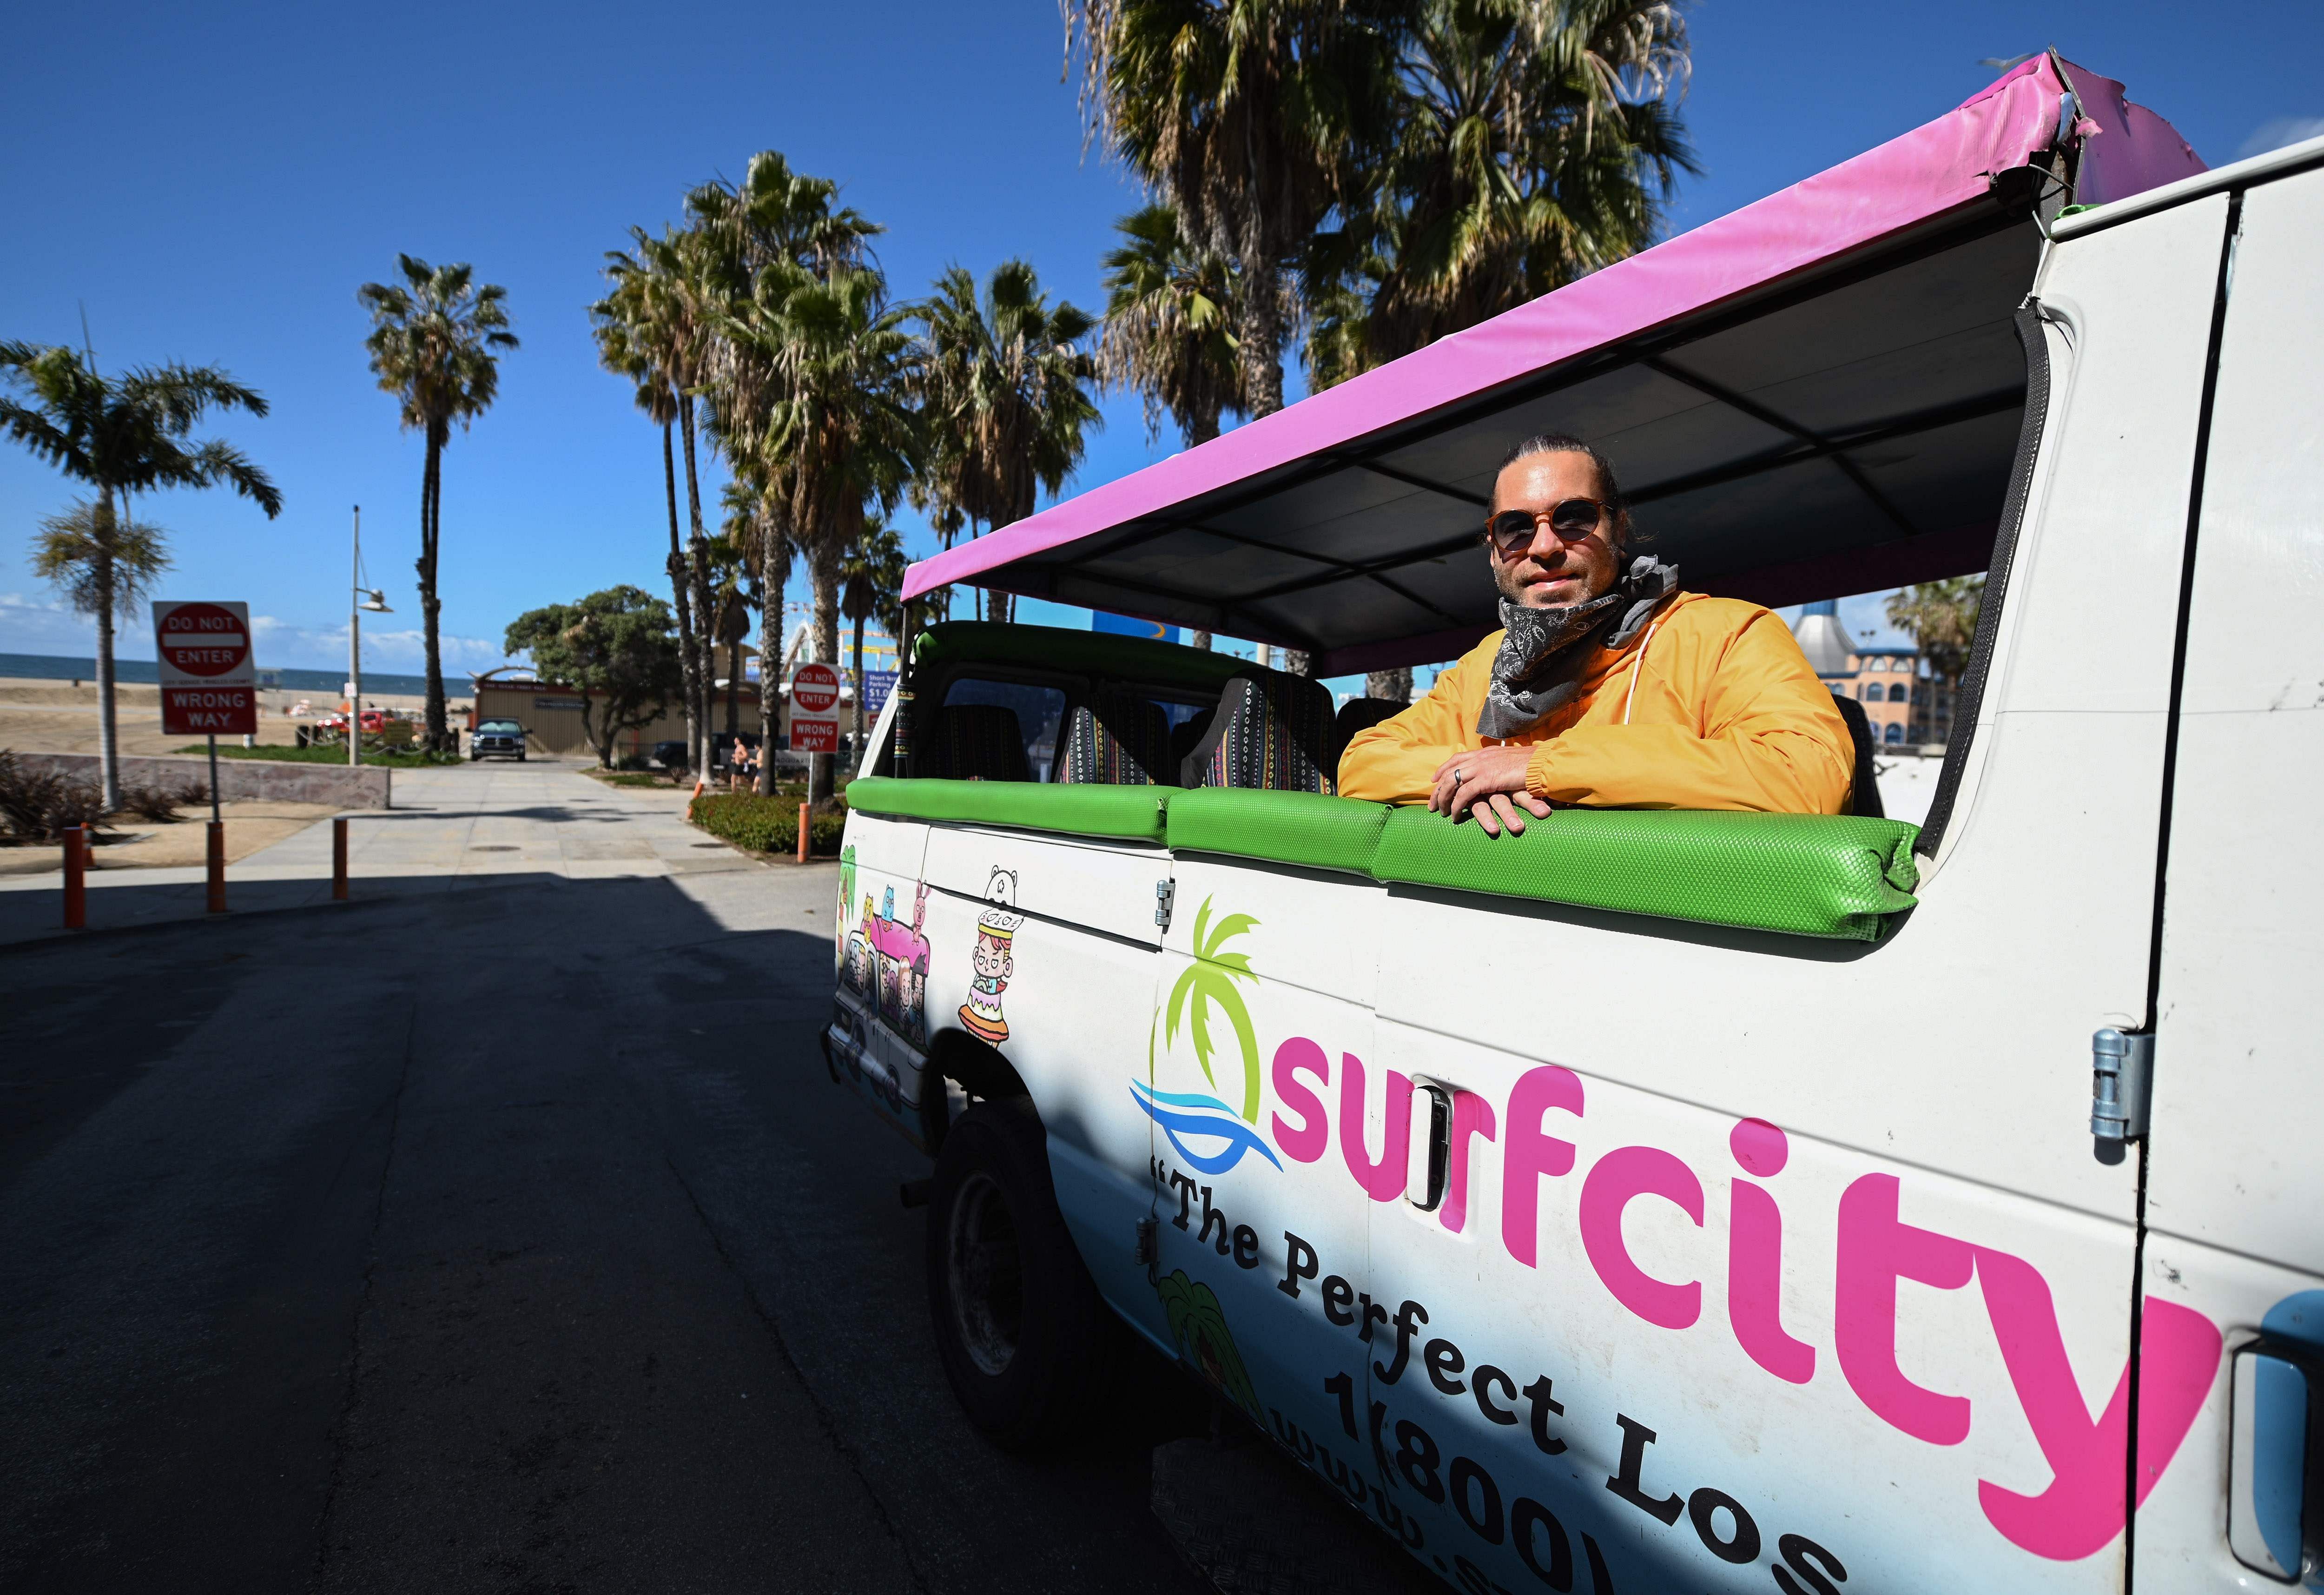 Adam Duford, owner of Surf City Tours, poses for a photo in one of his tour buses on an empty street near the beach in Santa Monica, California. (Credit: AFP)